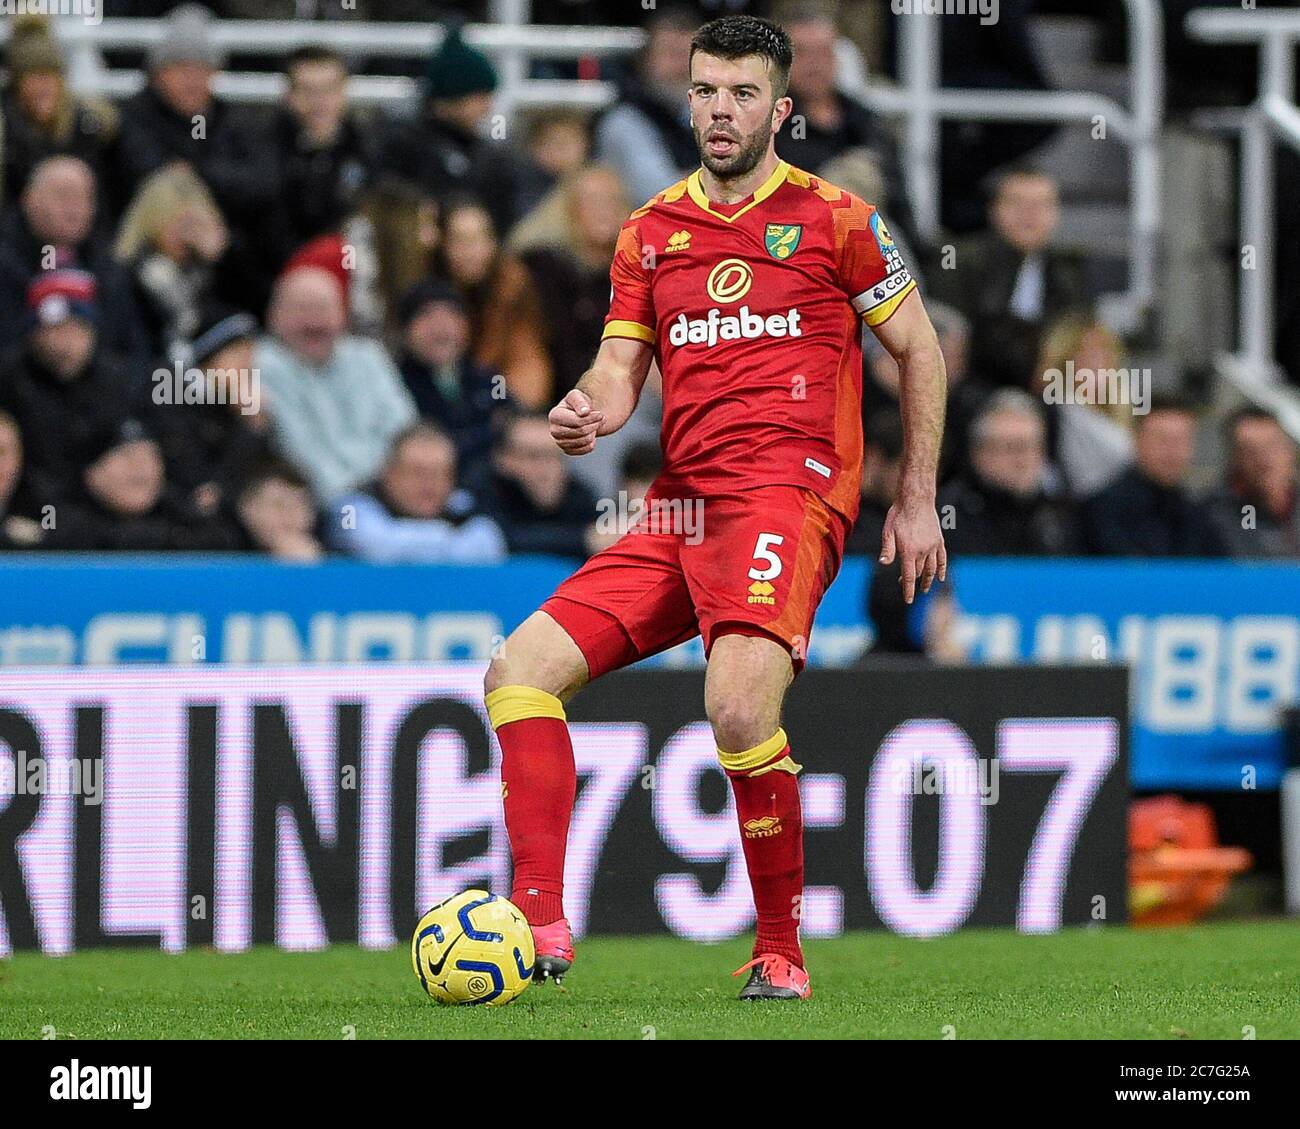 1st February 2020, St. James's Park, Newcastle, England; Premier League, Newcastle United v Norwich City : Grant Hanley (5) of Norwich City in action Stock Photo